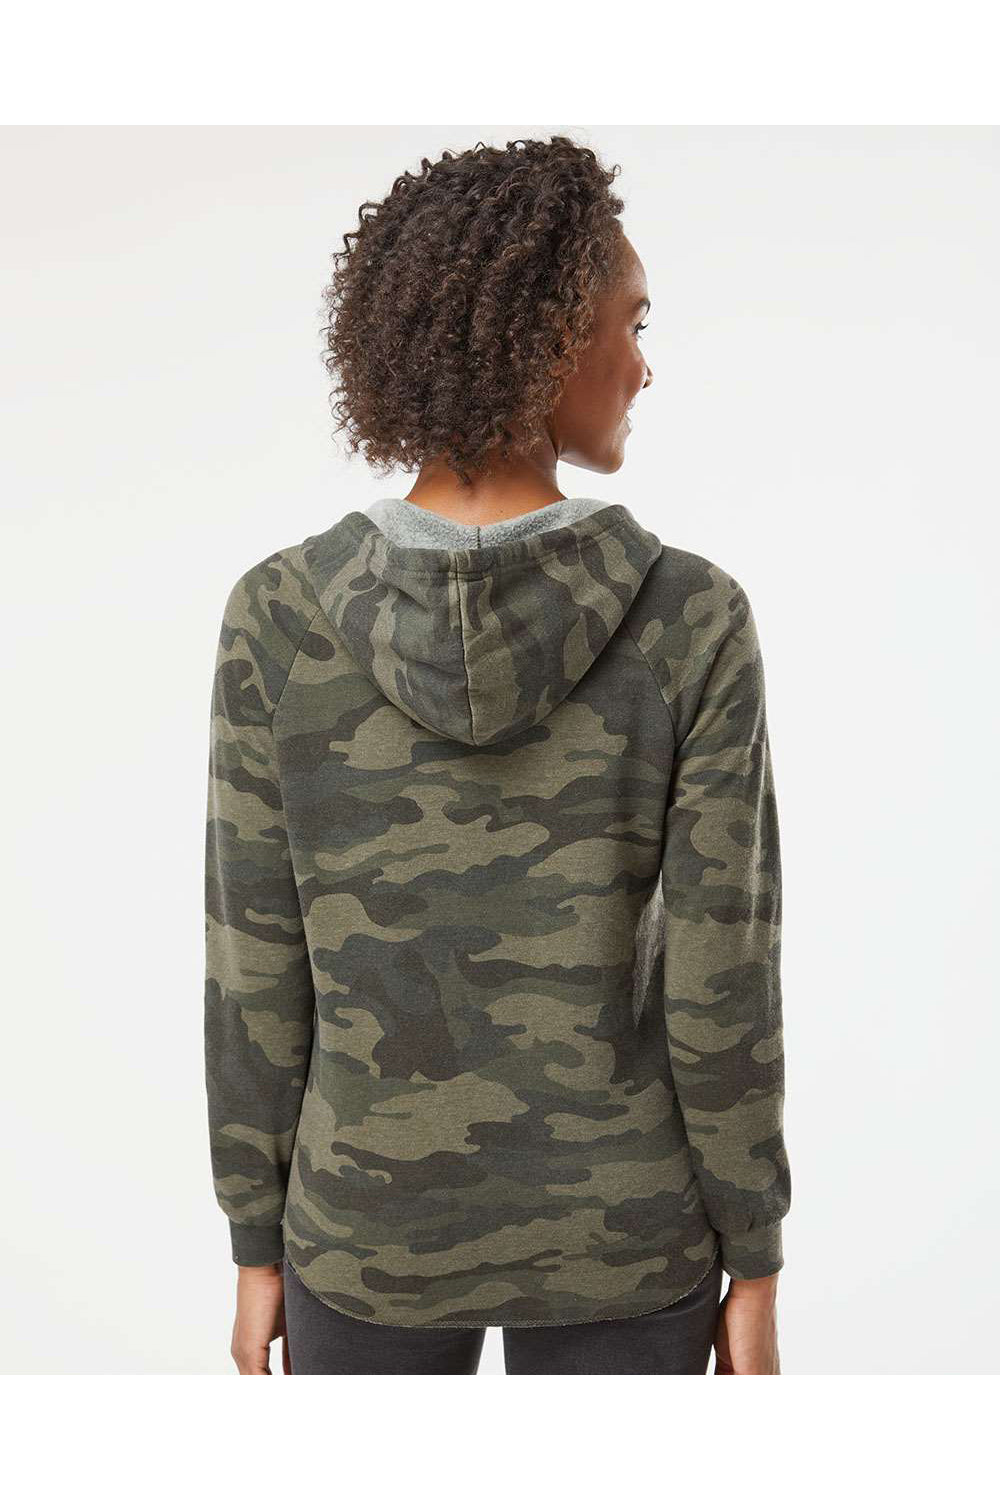 Independent Trading Co. PRM2500 Womens California Wave Wash Hooded Sweatshirt Hoodie Heather Forest Green Camo Model Back